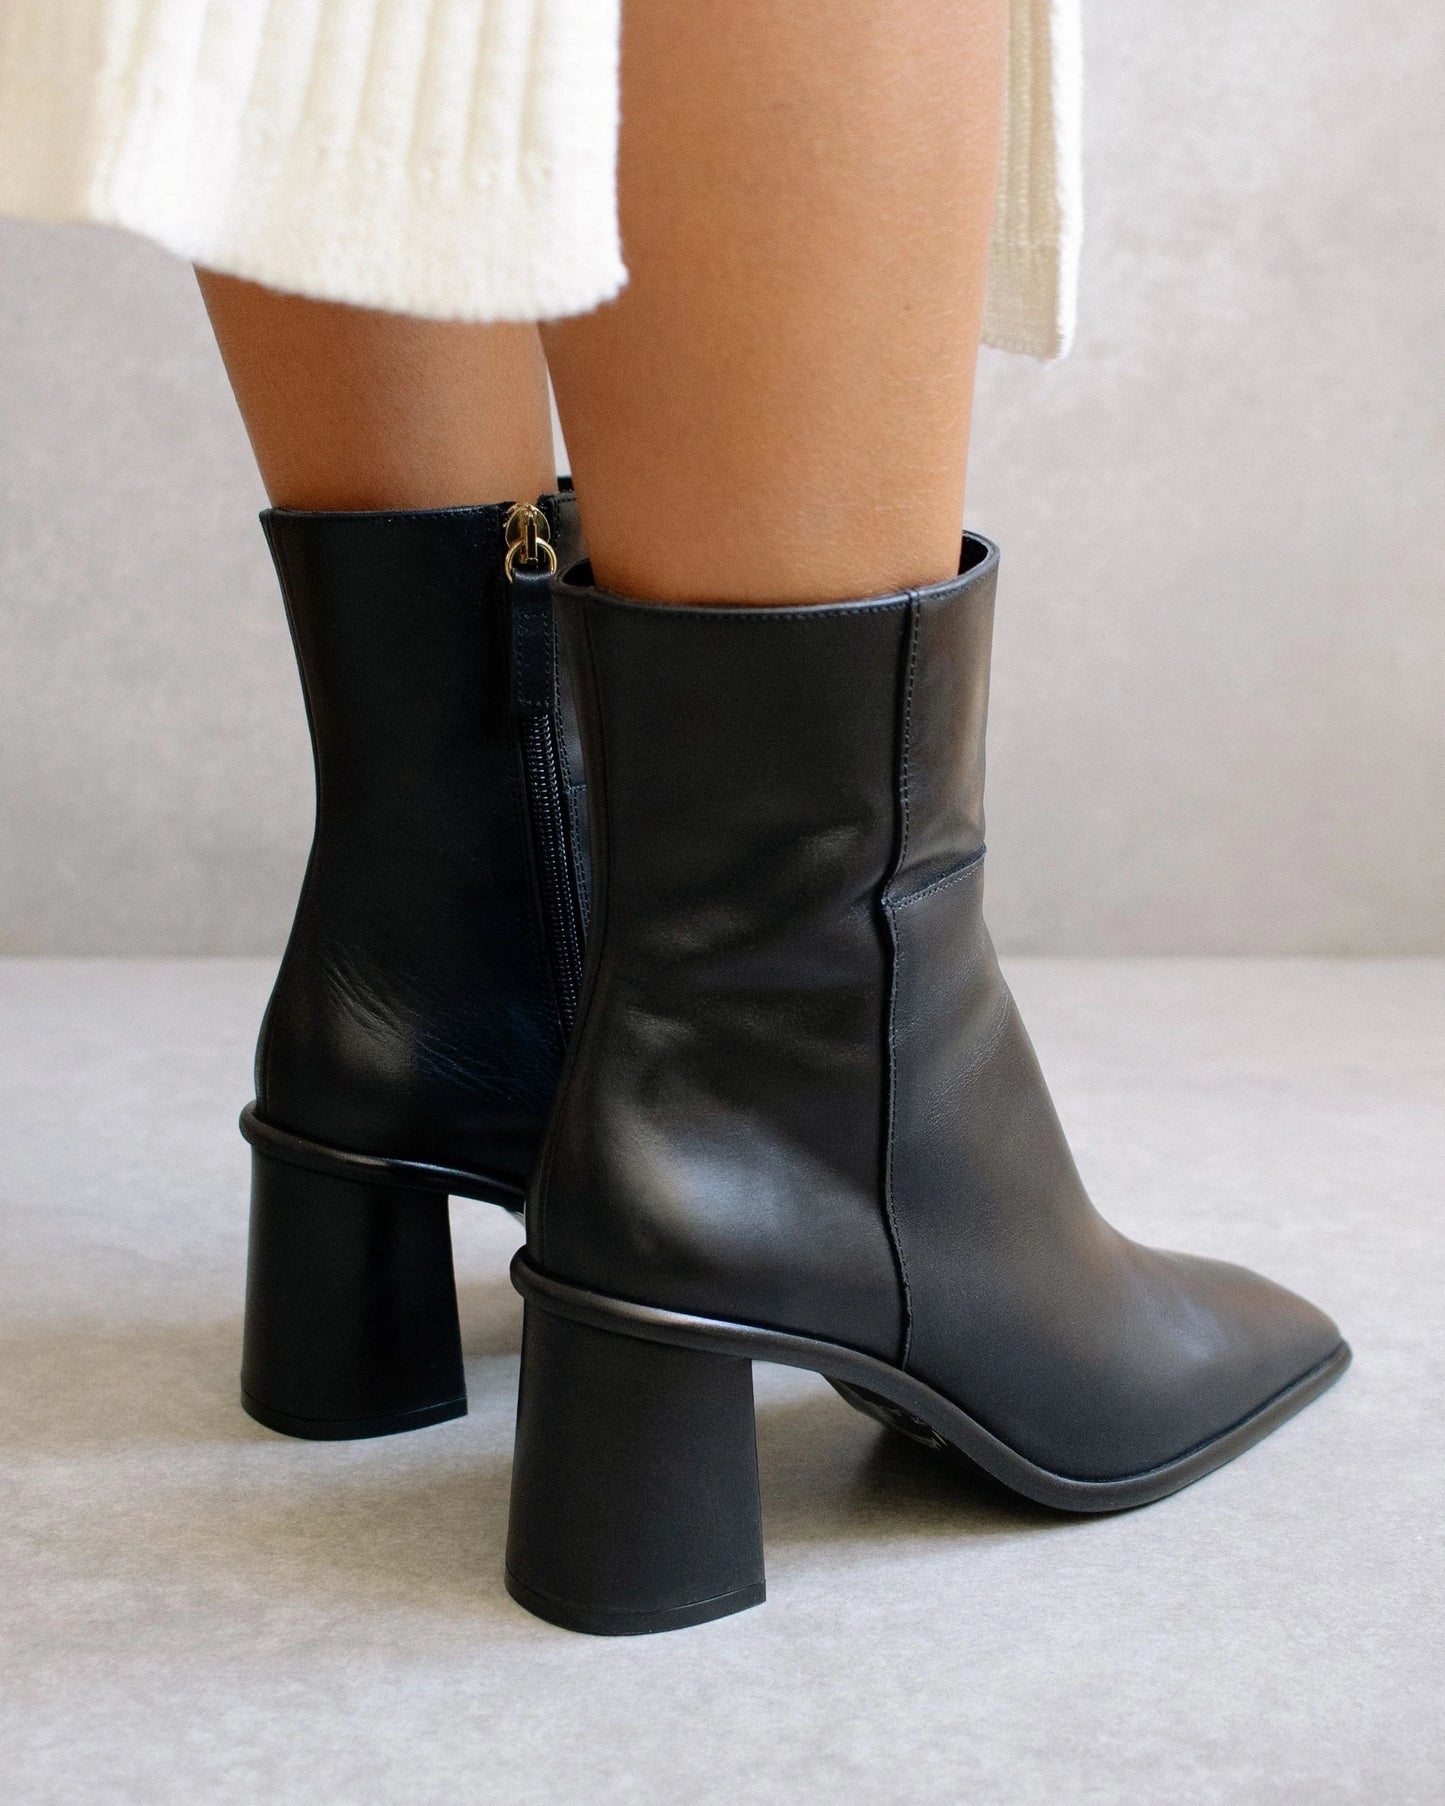 WEST TOTAL BLACK ANKLE BOOT